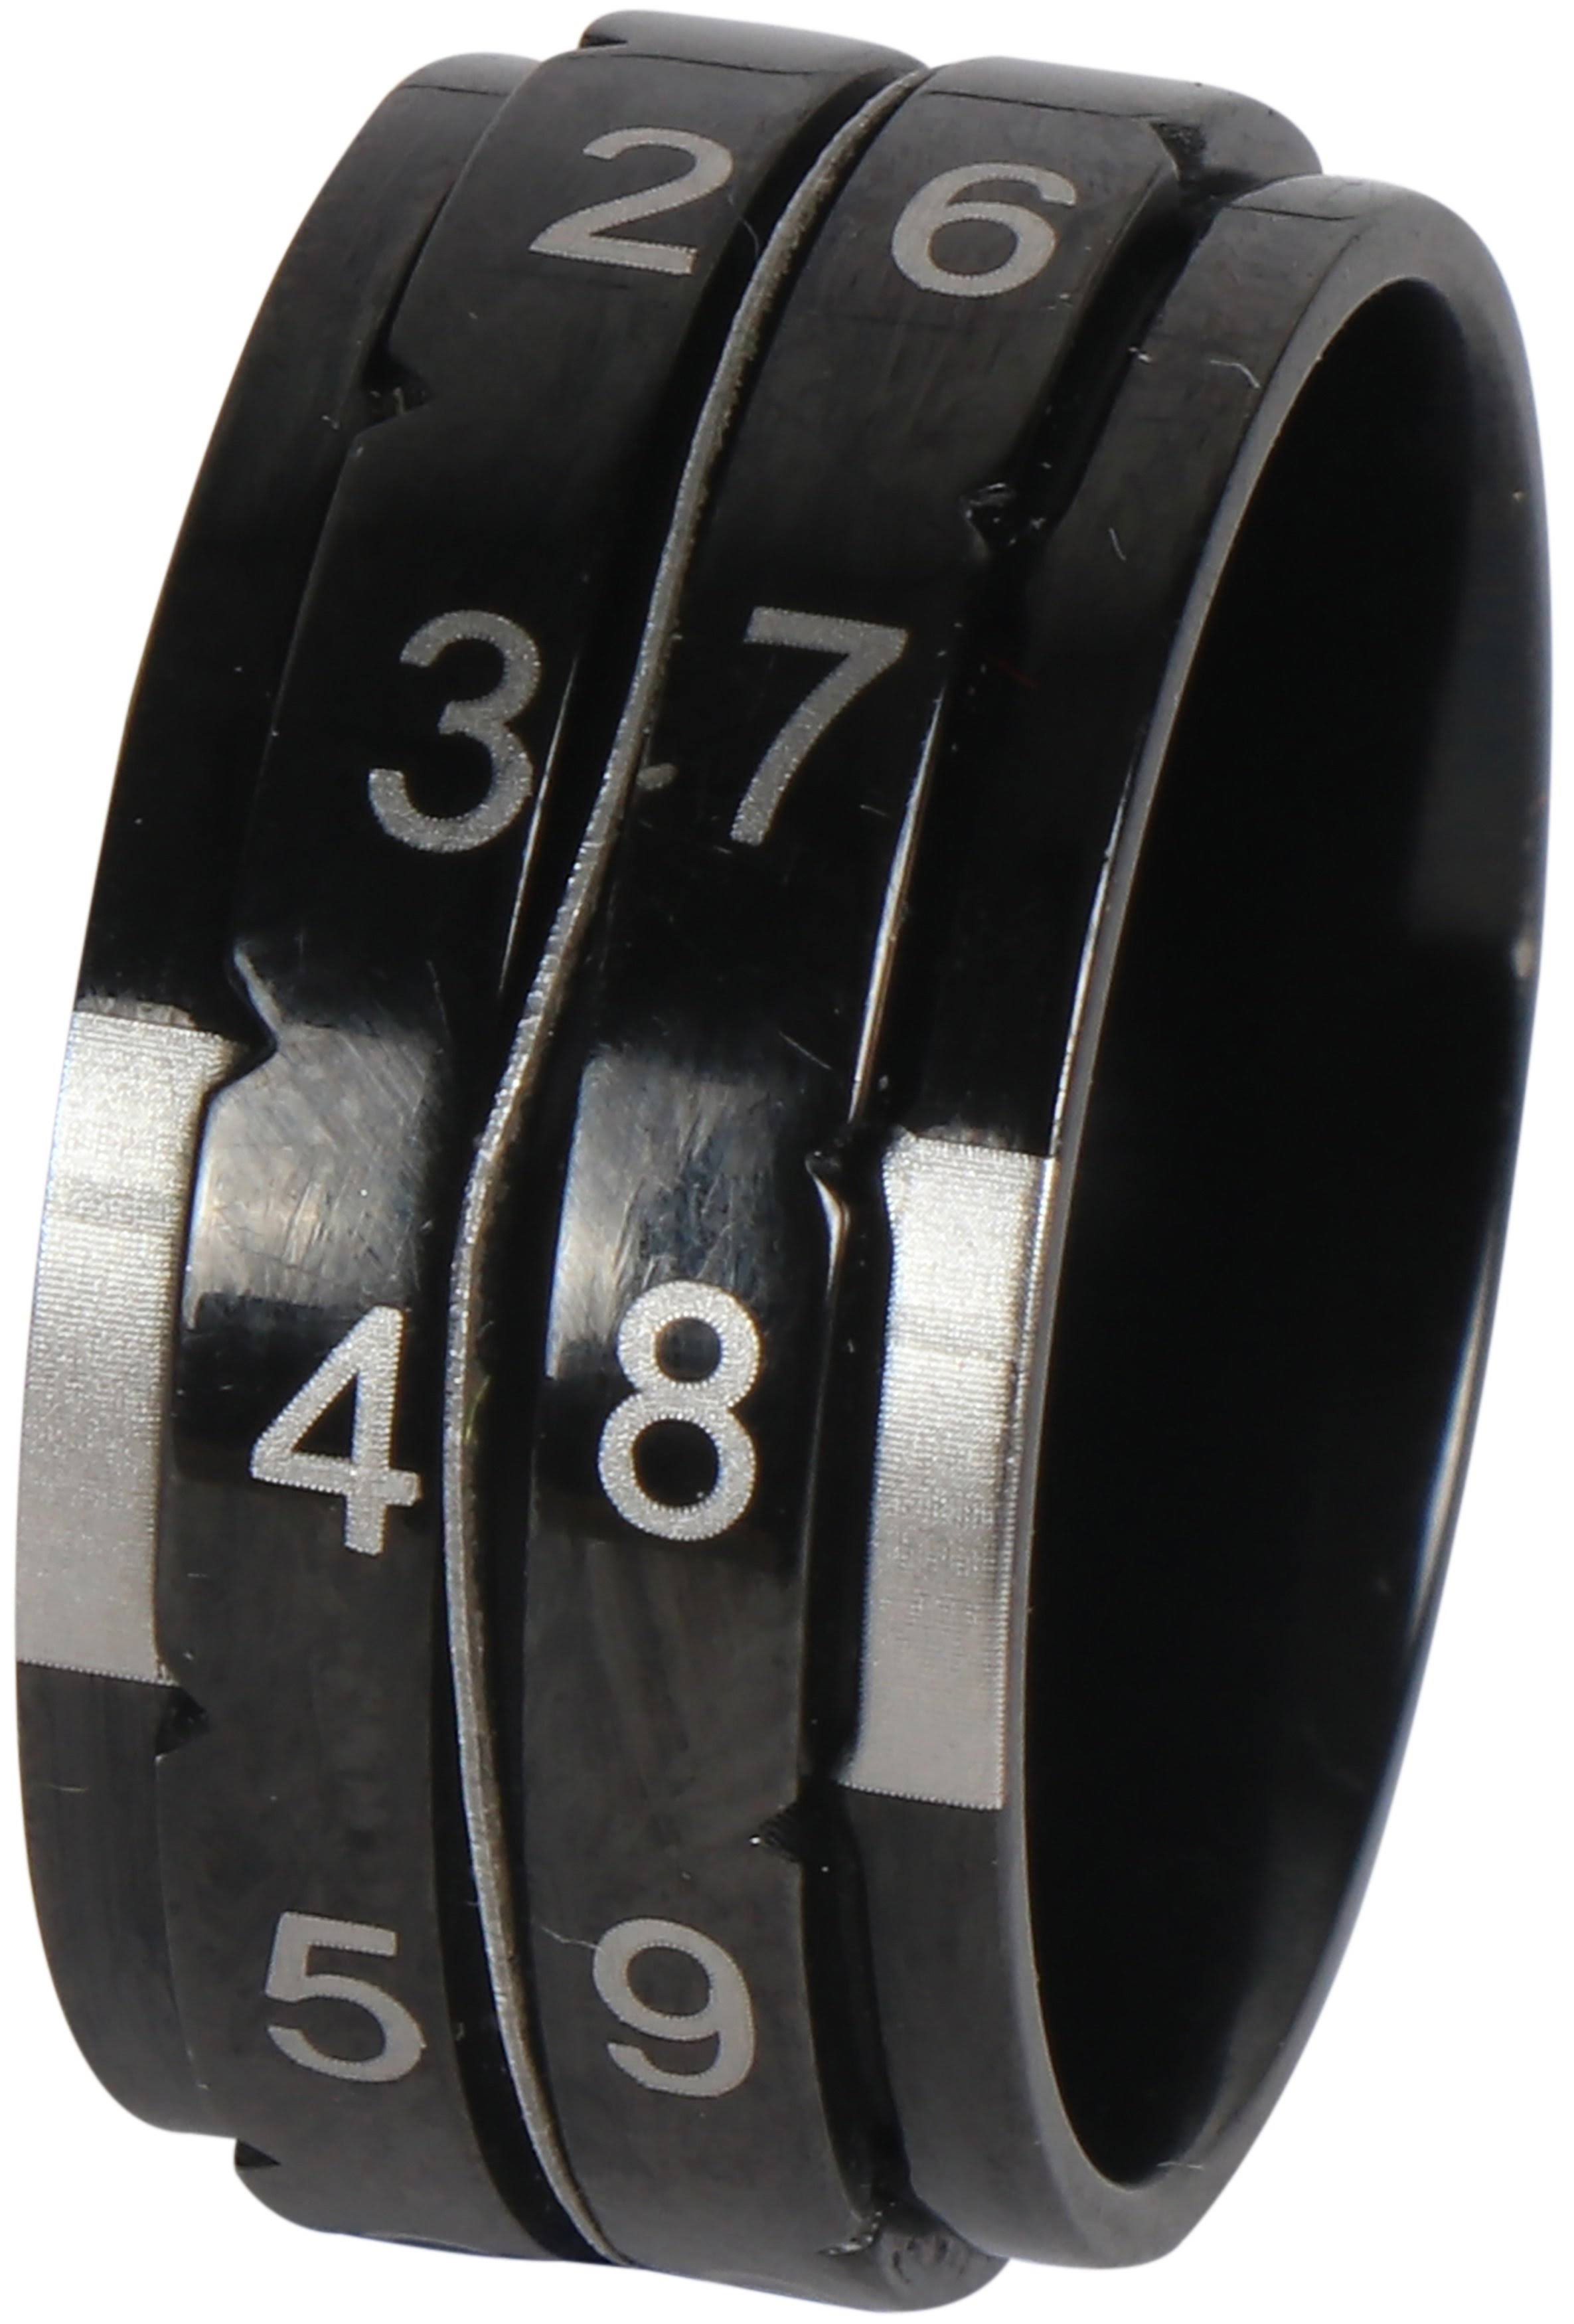 Knitter's Pride KP800407 Row Counter Ring-size 9: 19.0mm Diameter